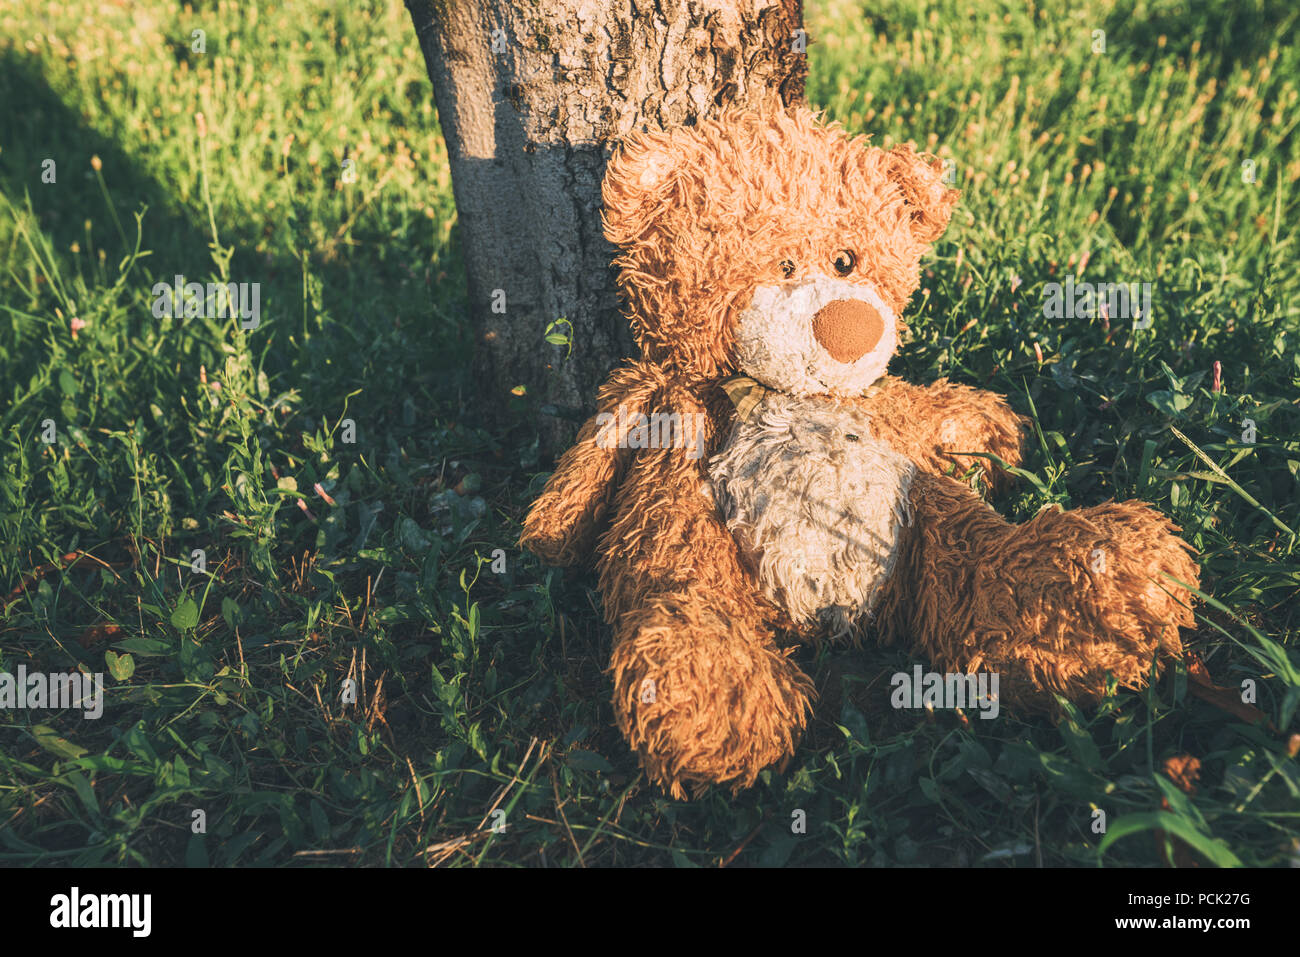 Miserable abandoned teddy bear outdoors leaning on to tree Stock Photo